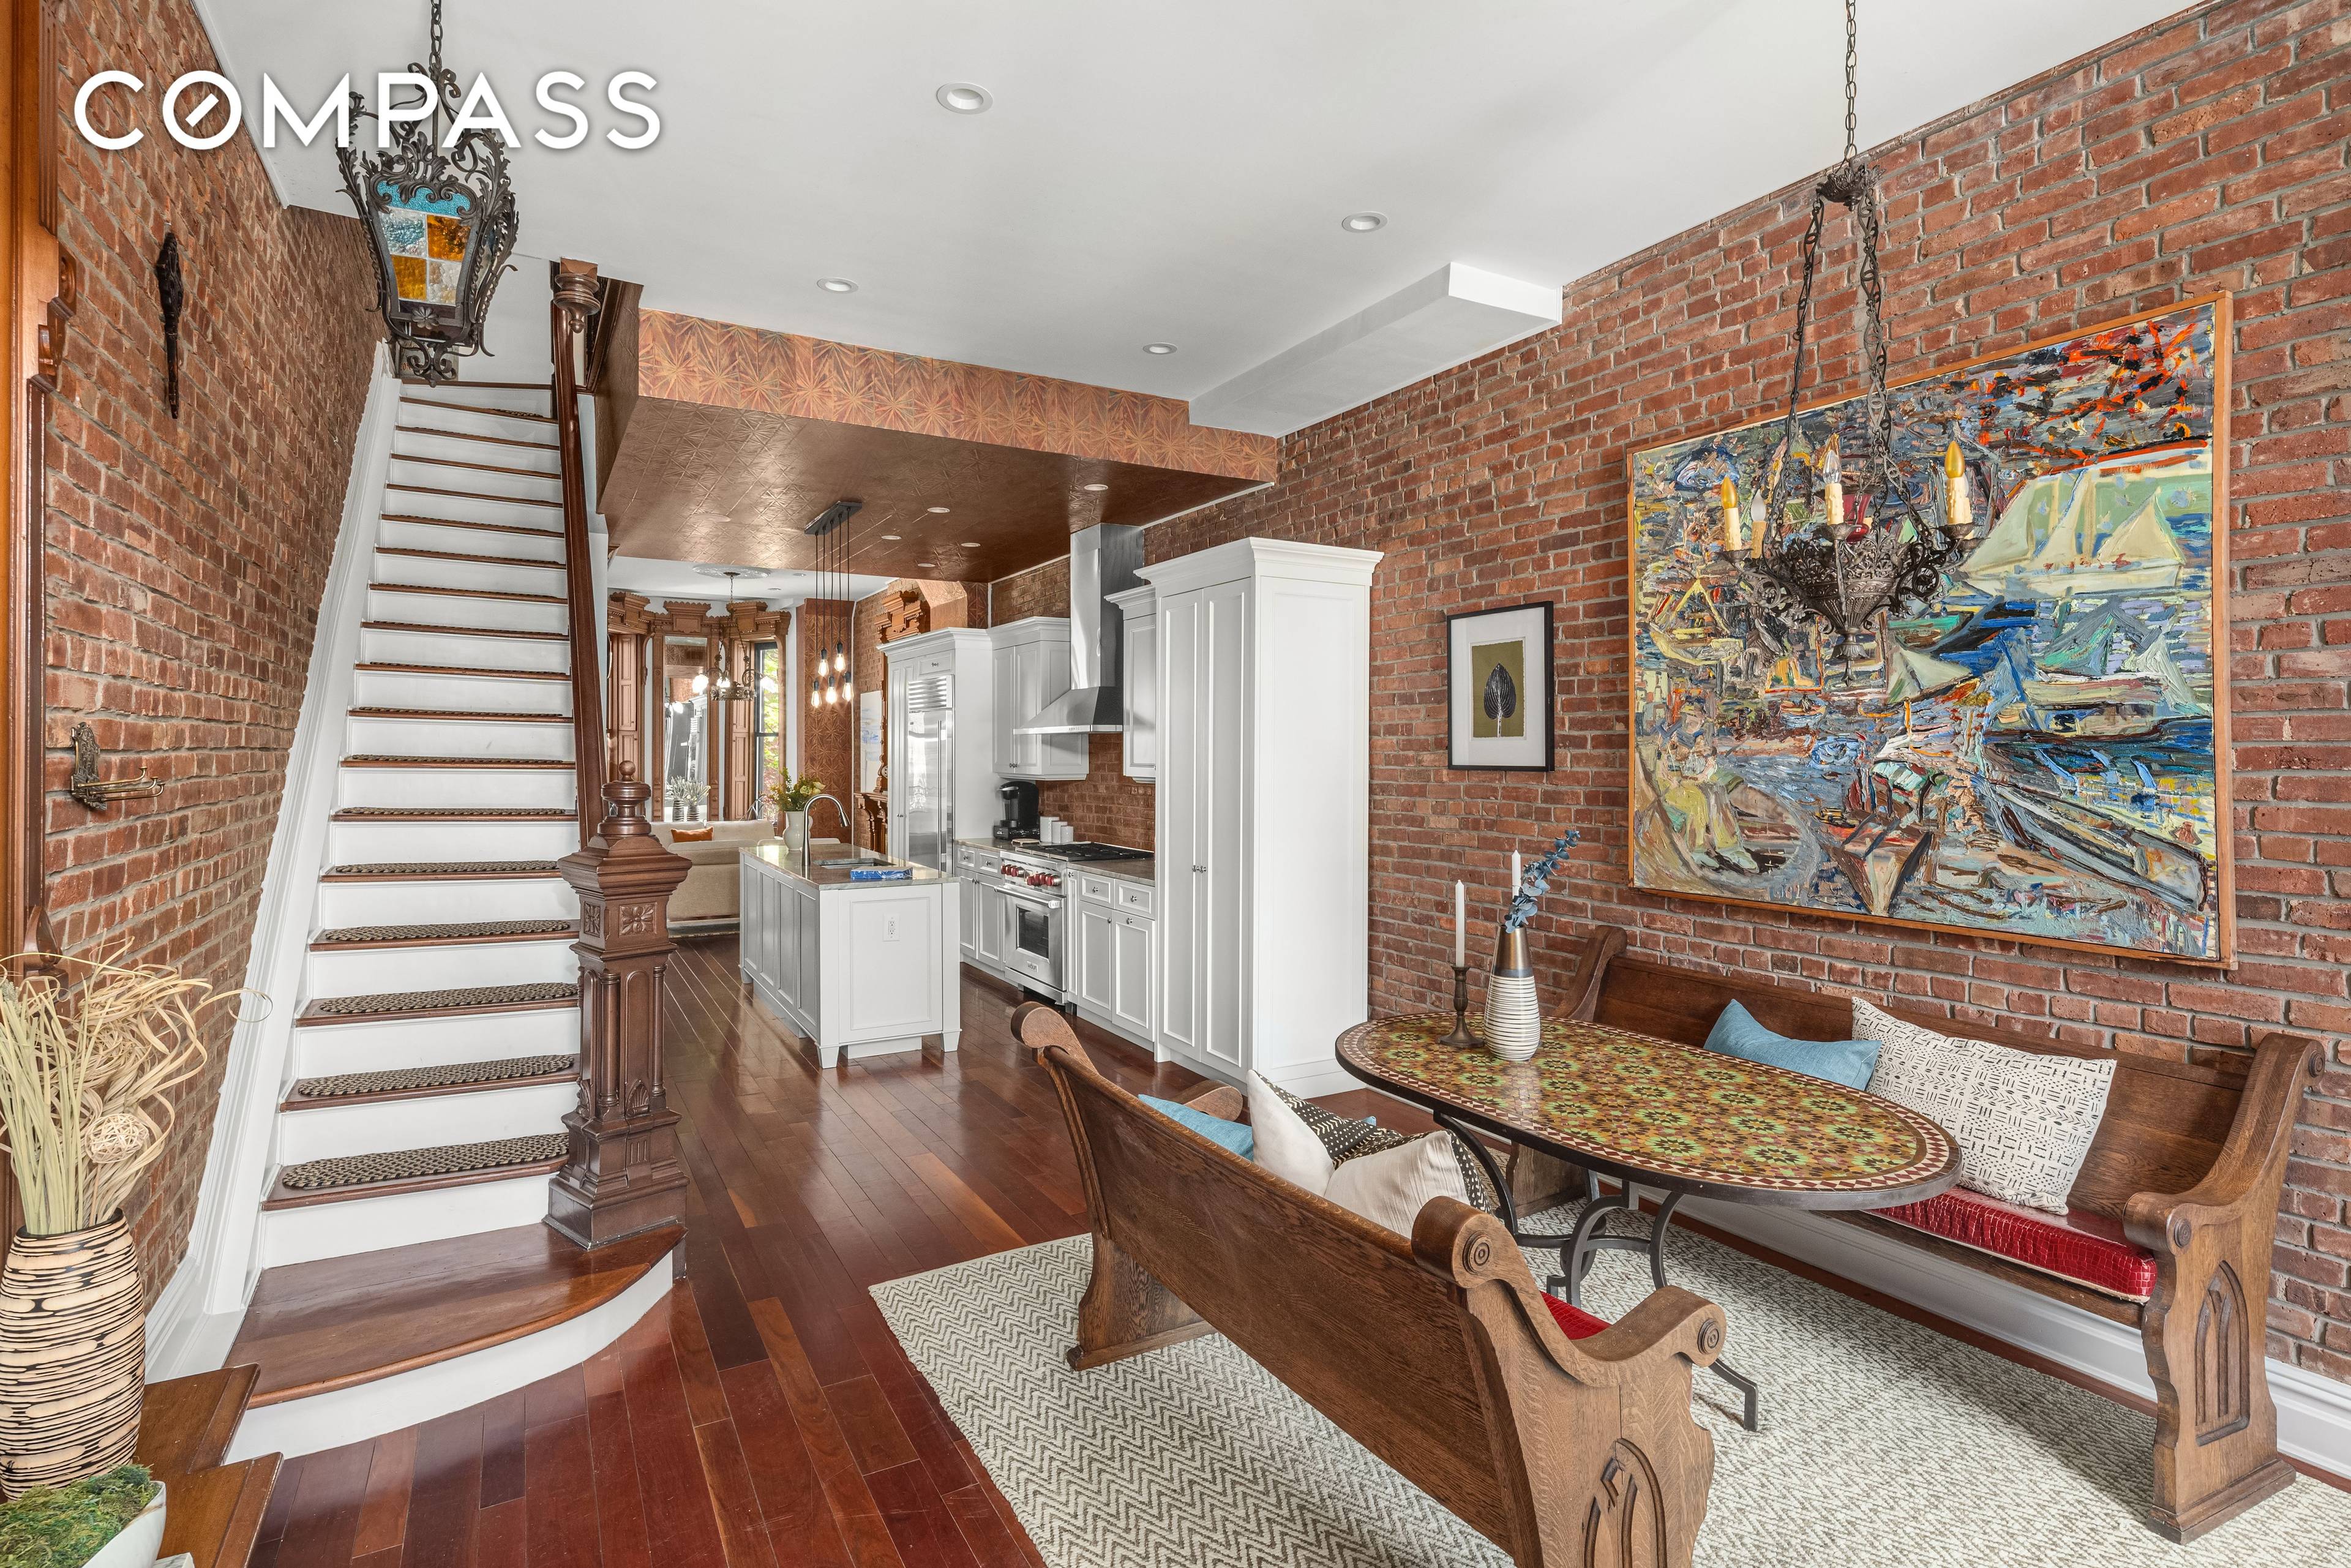 145 W 126th St is an elegantly restored Harlem brownstone that offers a rare blend of historic charm and modern grandeur.